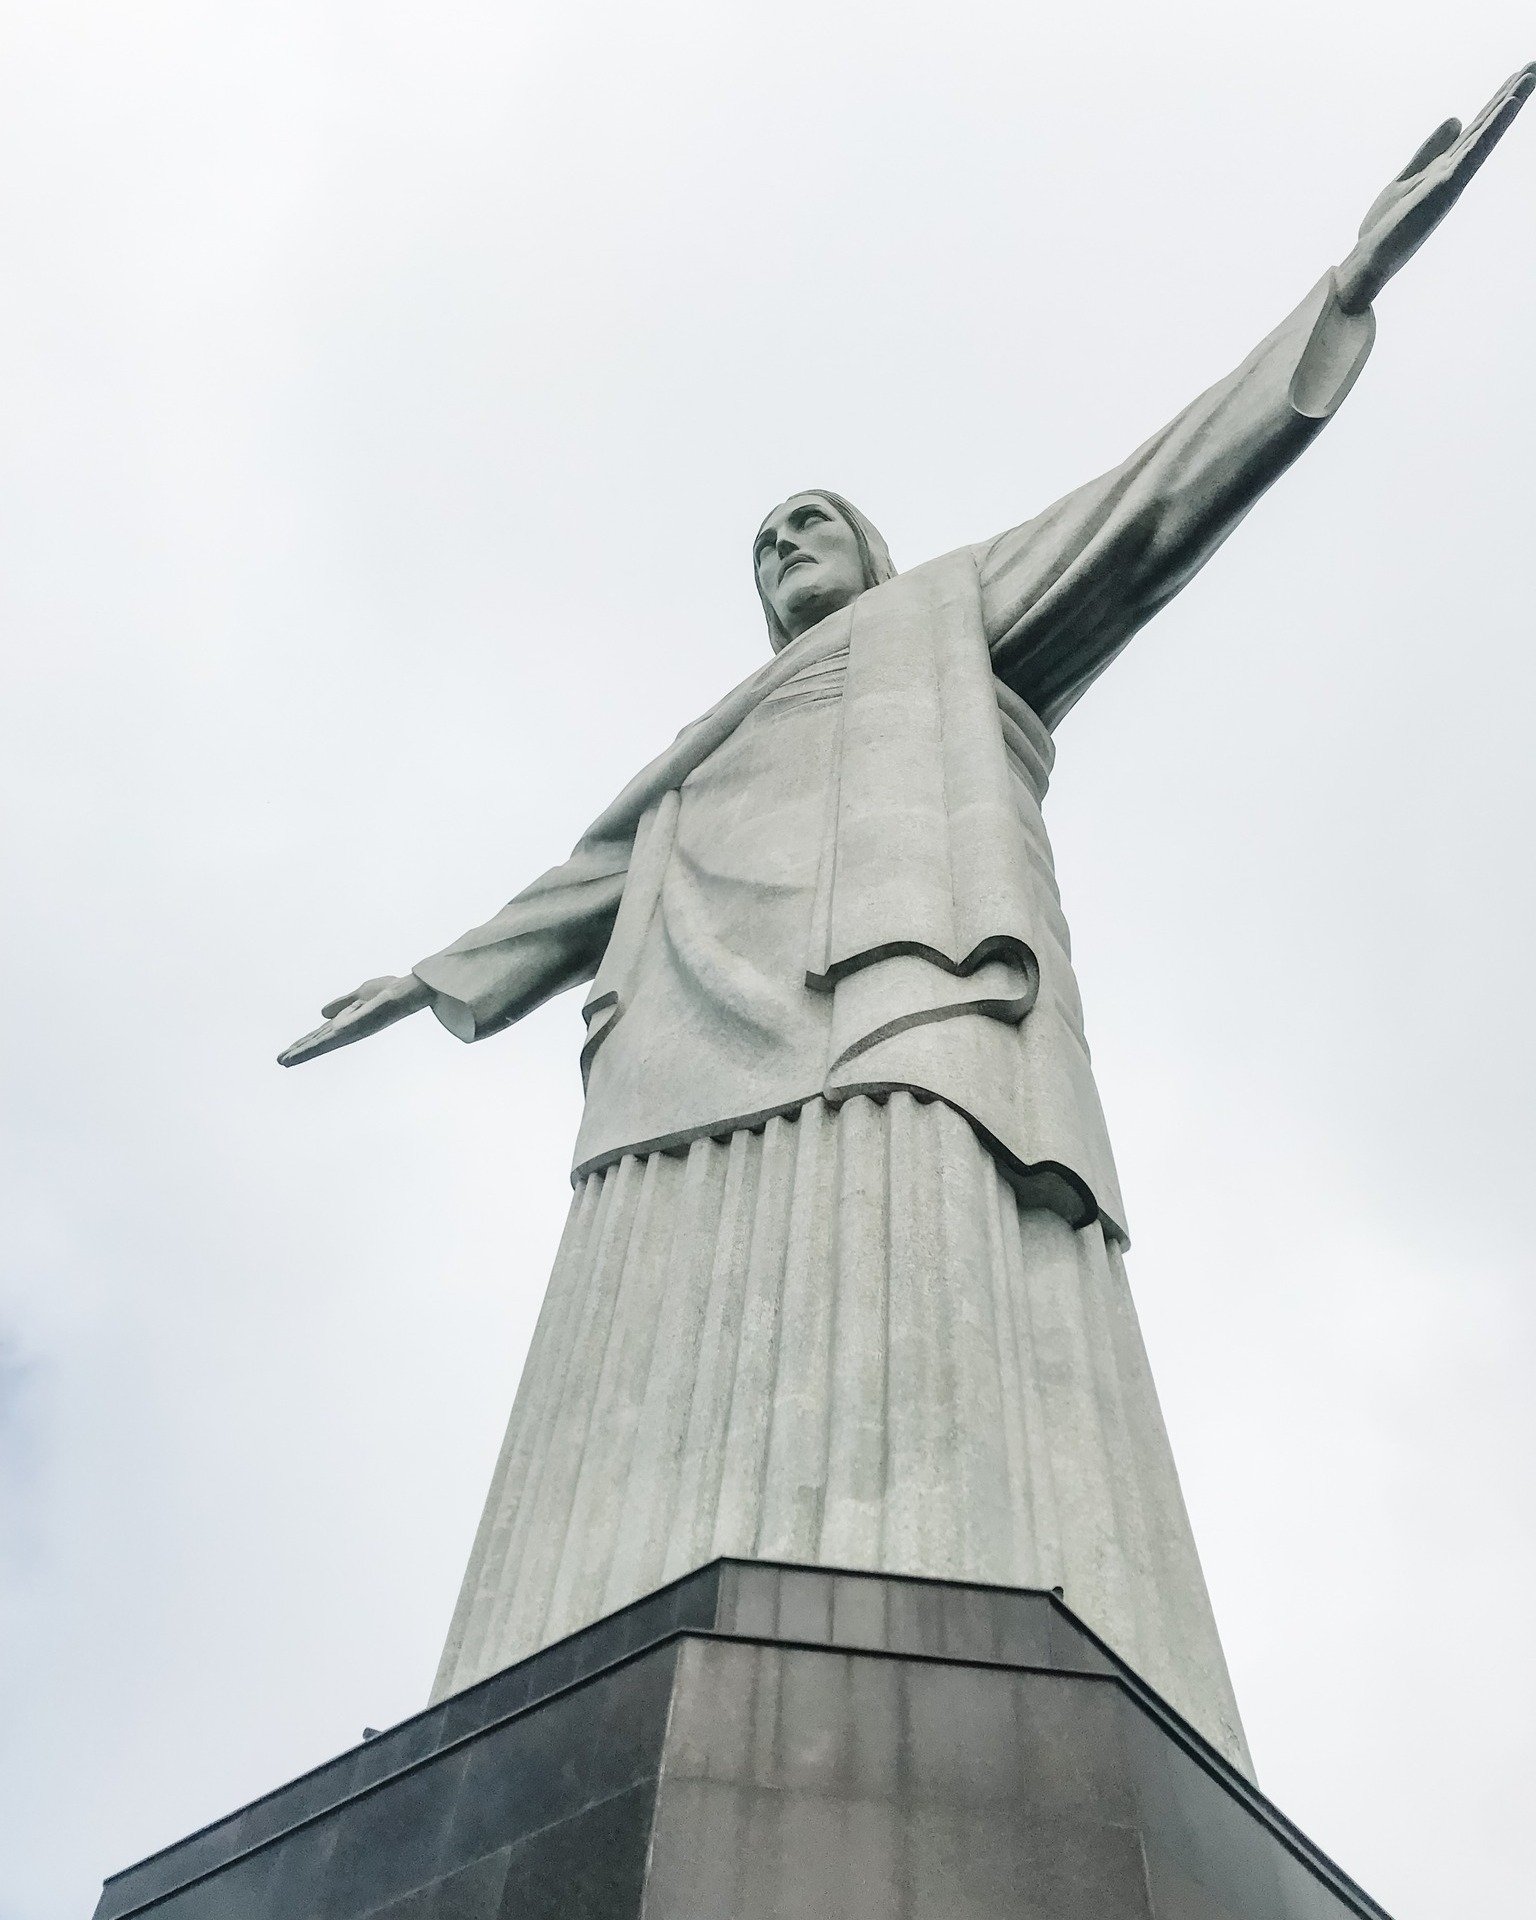 MY PHILOSOPHY 

We take our children almost everywhere. We took them to Rio (twice). Both times we went up to see Christ the Redeemer (one of the new Wonders of the World). Miss 14 was, respectively, 2 and 8 years old when we went. 
She told us the o